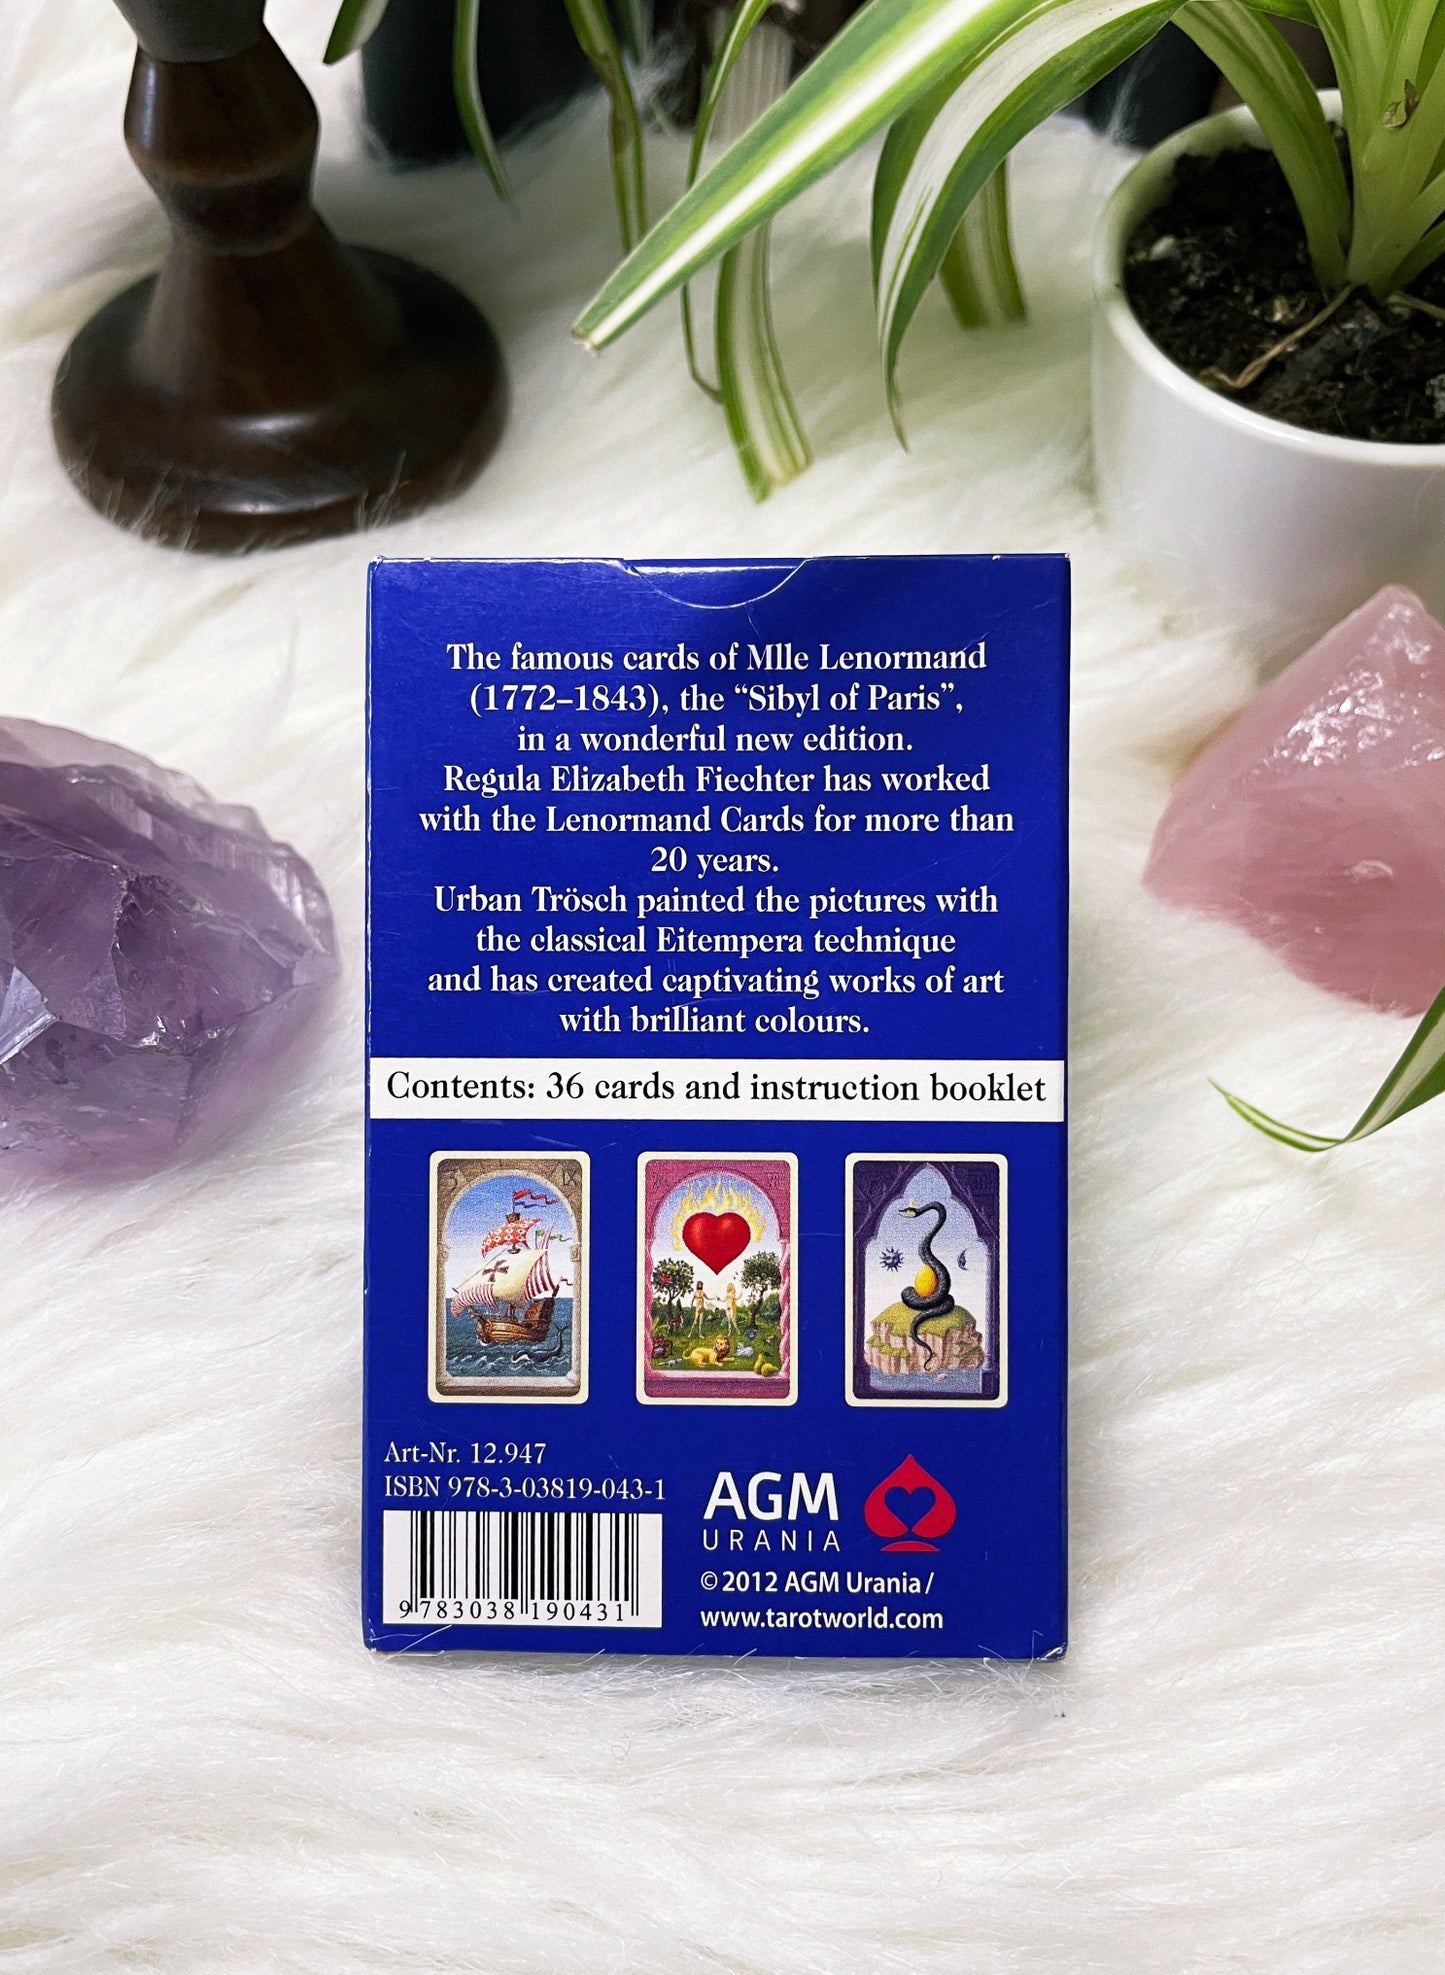 Pictured is a deck of Mystical Lenormand Oracle cards.